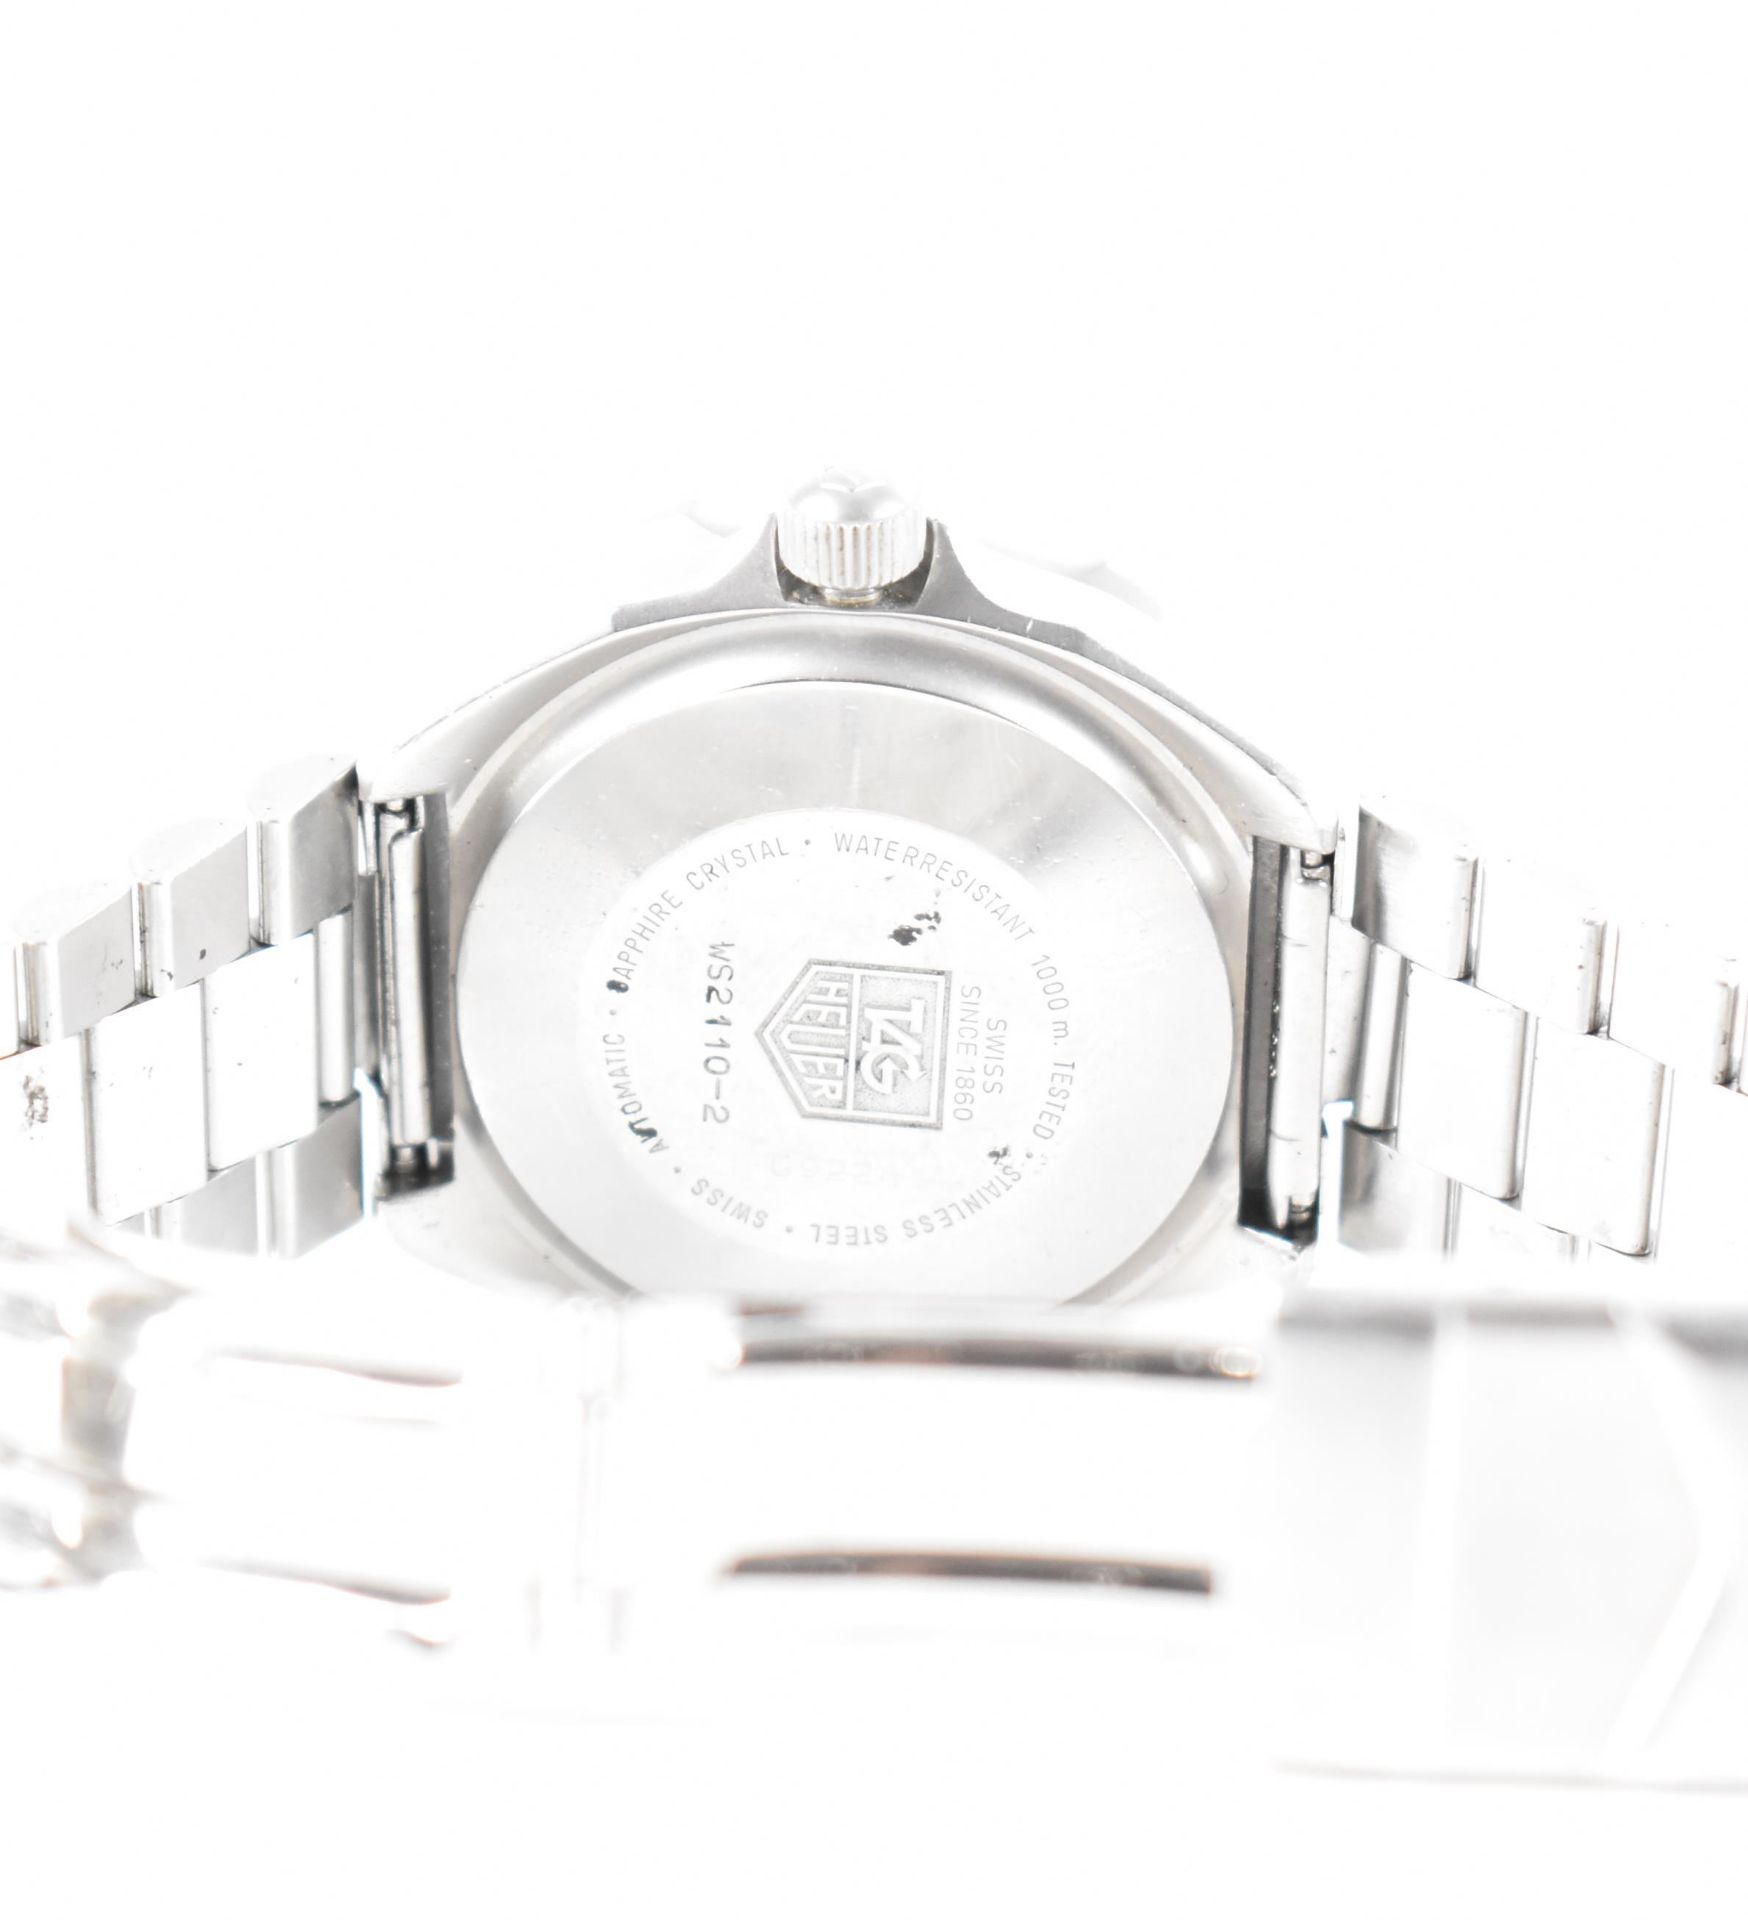 TAG HEUER AUTOMATIC SUPER PROFESSION WRIST WATCH - Image 5 of 5